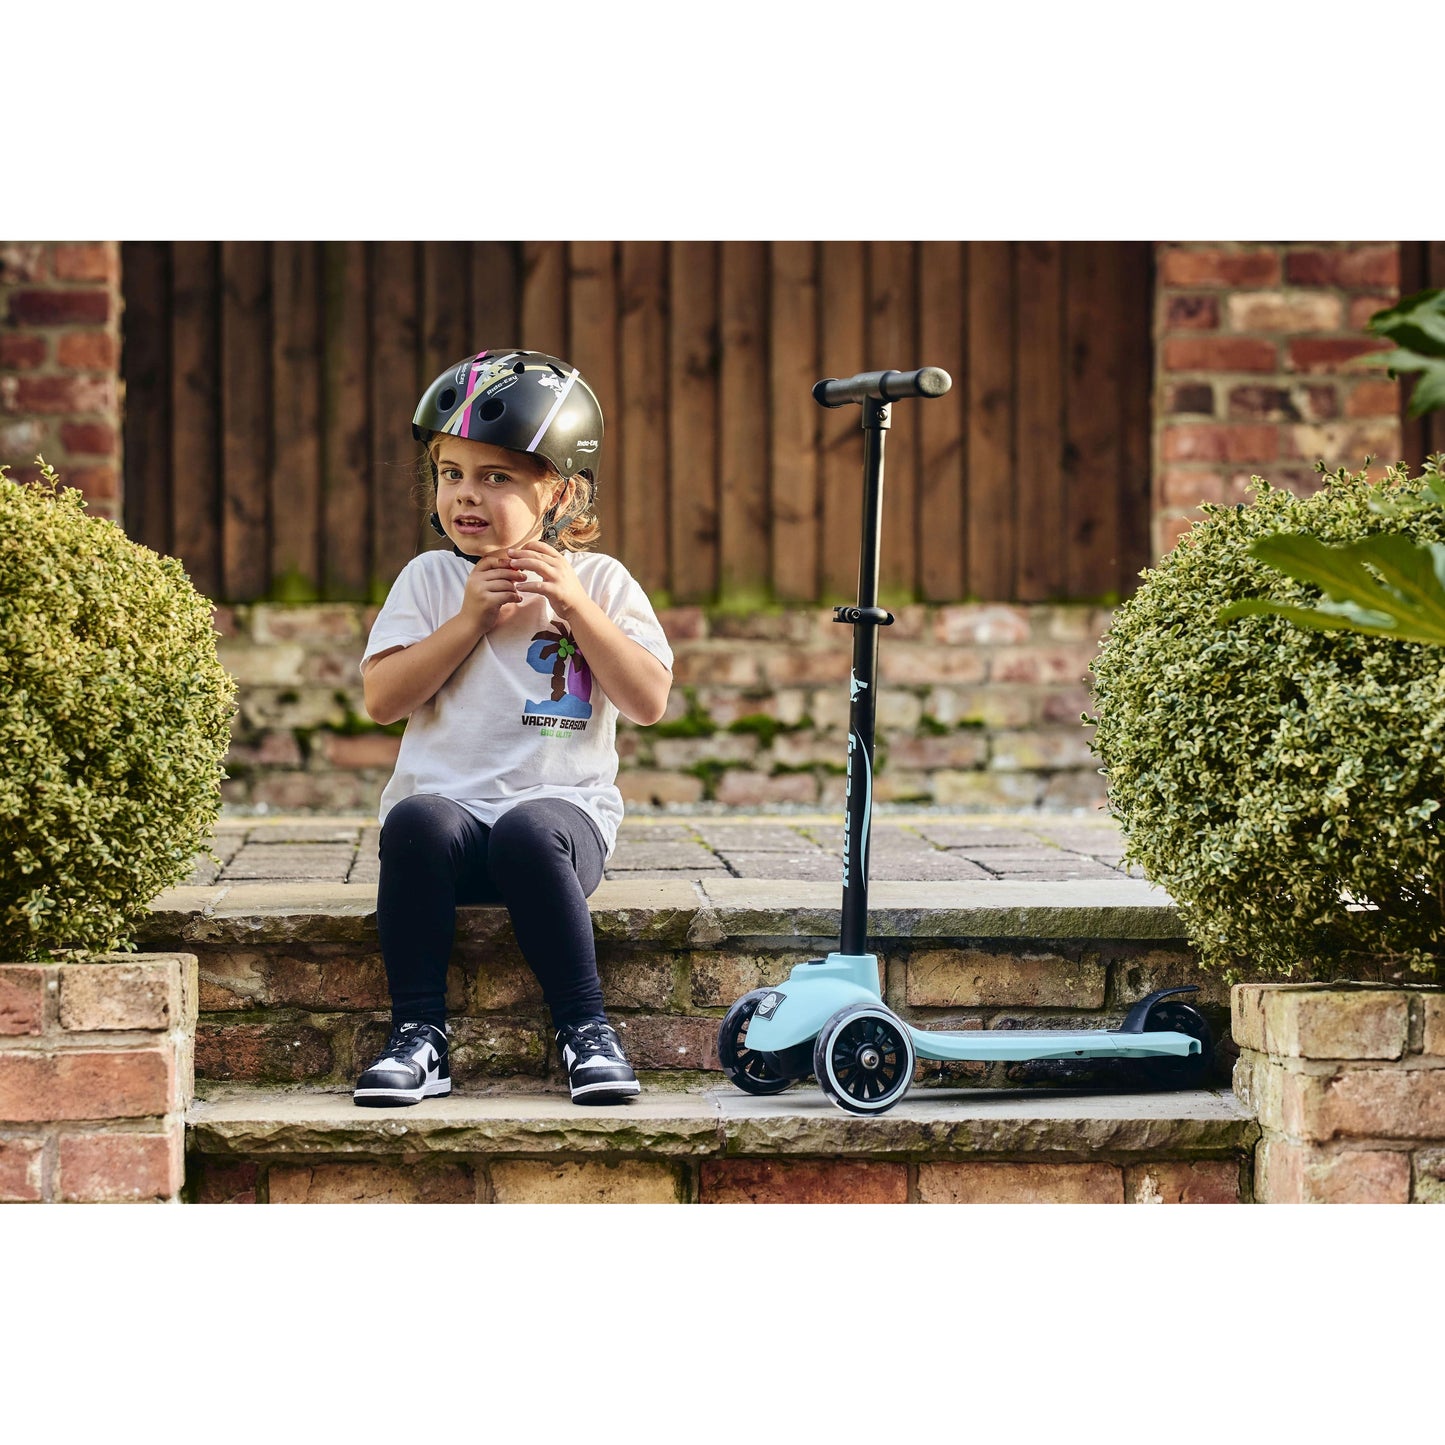 child sitting on steps next to Ride-Ezy Kick Scooter - Kingfisher